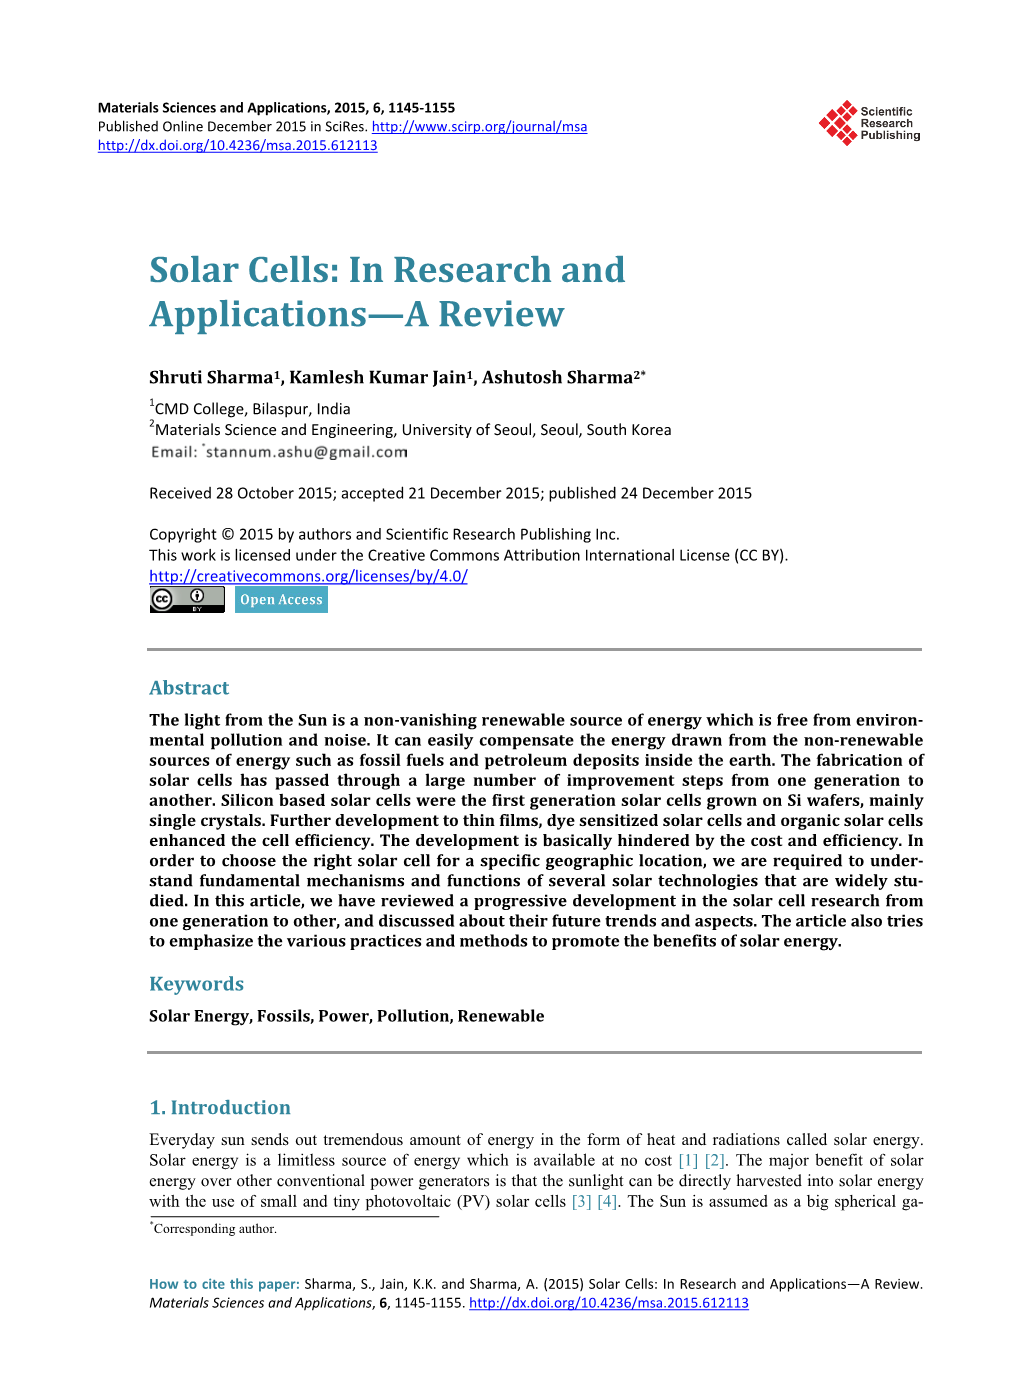 Solar Cells: in Research and Applications—A Review